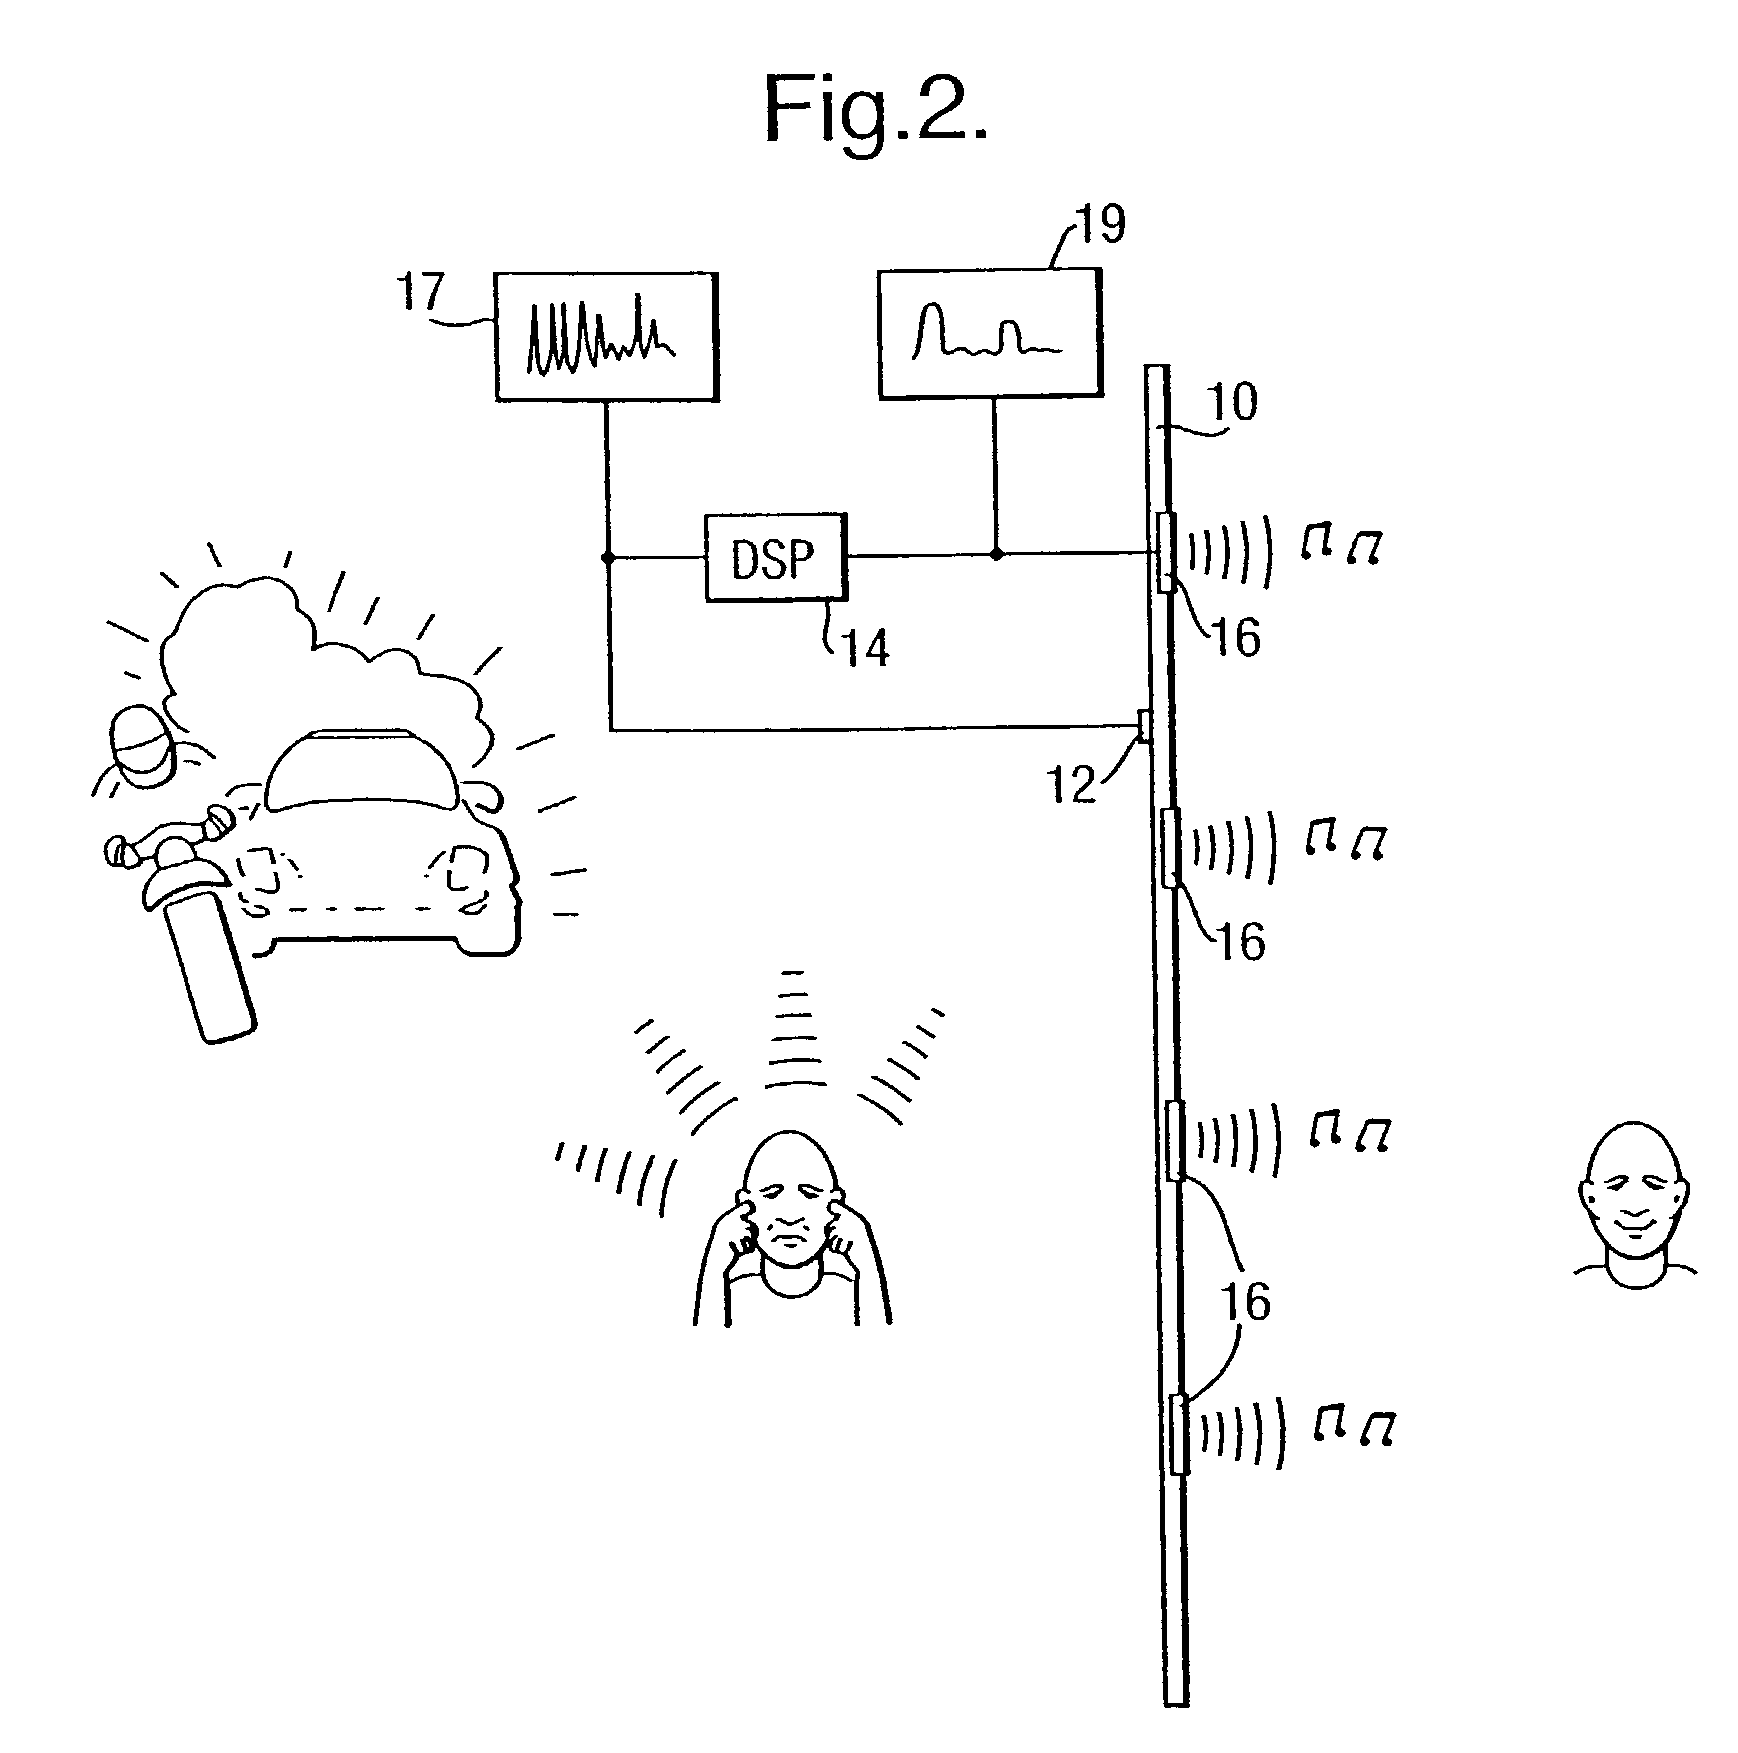 Apparatus for acoustically improving an environment